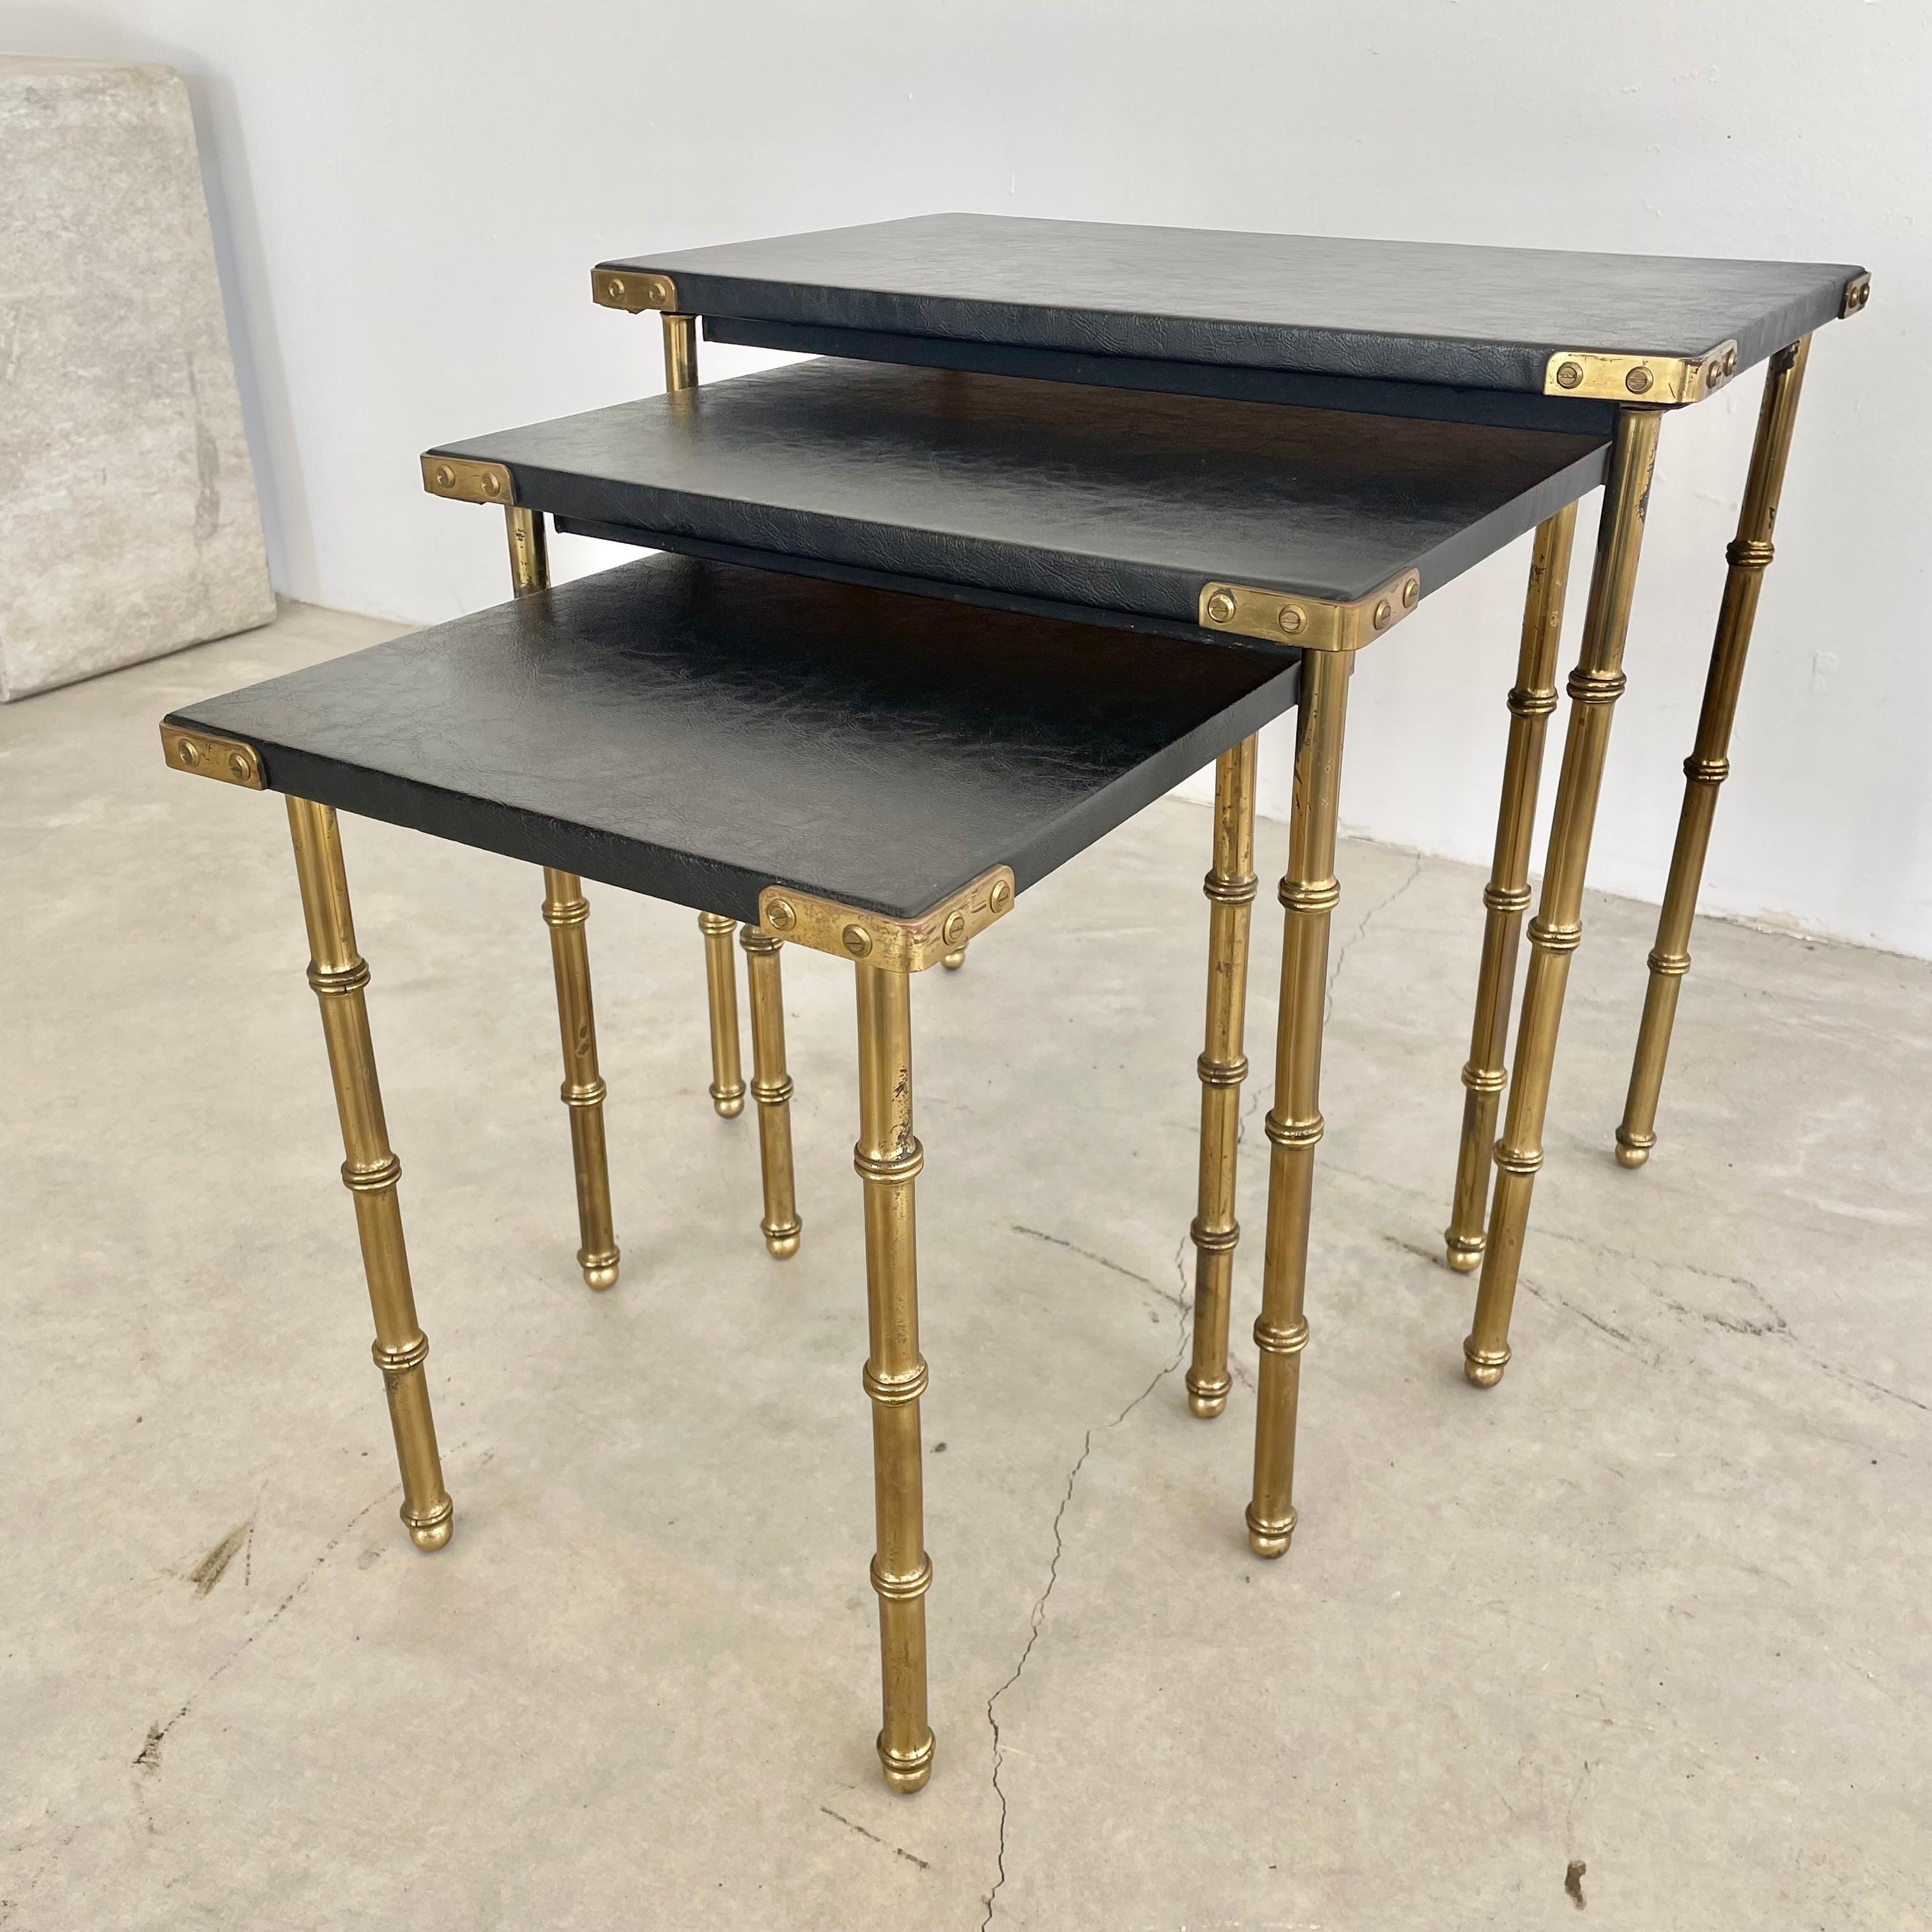 Set of 3 Jacques Adnet Nesting Tables, 1950s France For Sale 1